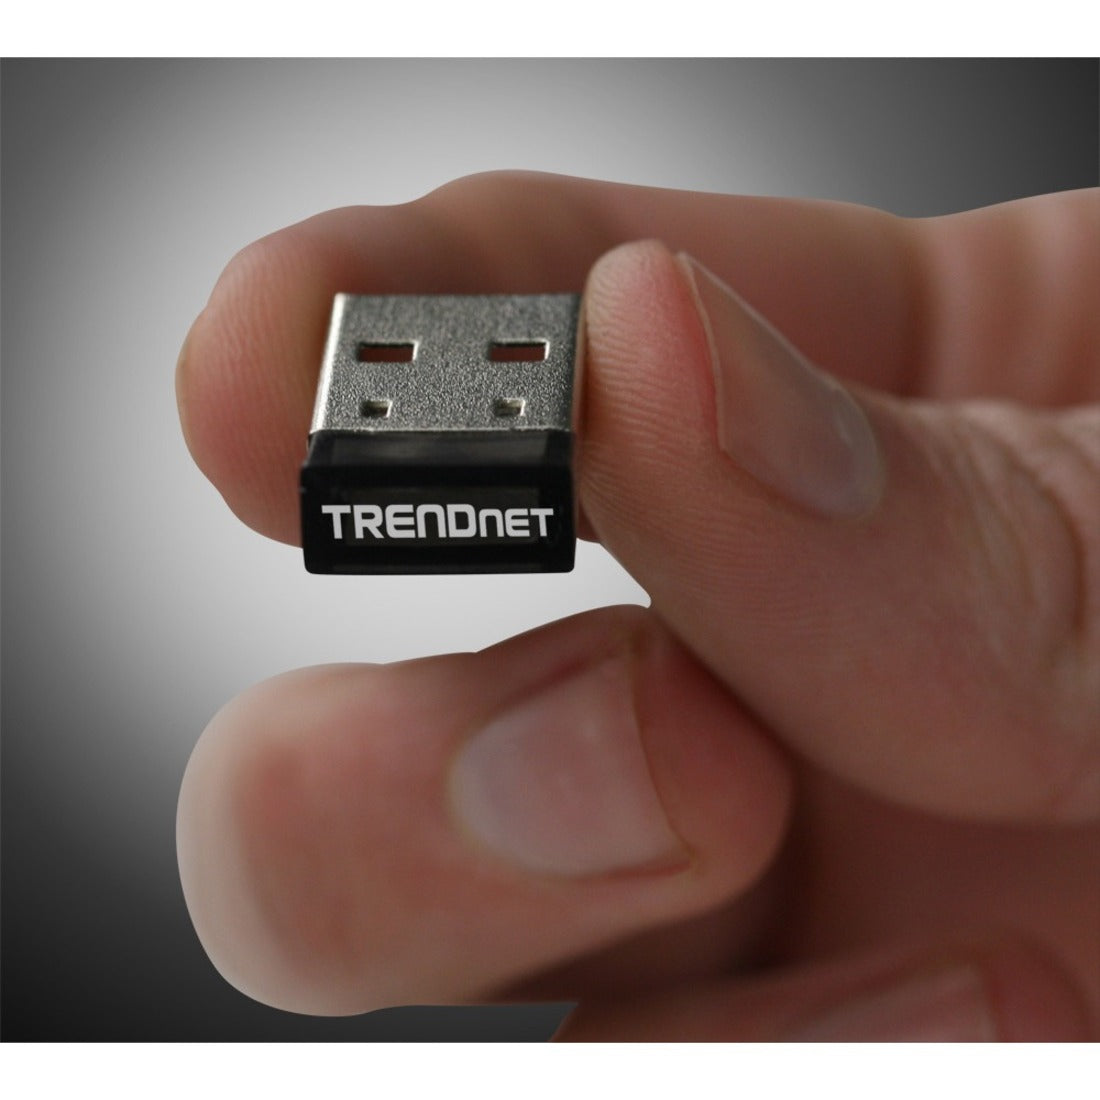 TRENDnet TBW-107UB Micro Bluetooth USB Adapter, Low Energy Class I, Distance up to 10 Meters/32.8 Feet, Win 8.1/8/7/Vista/XP Compatible